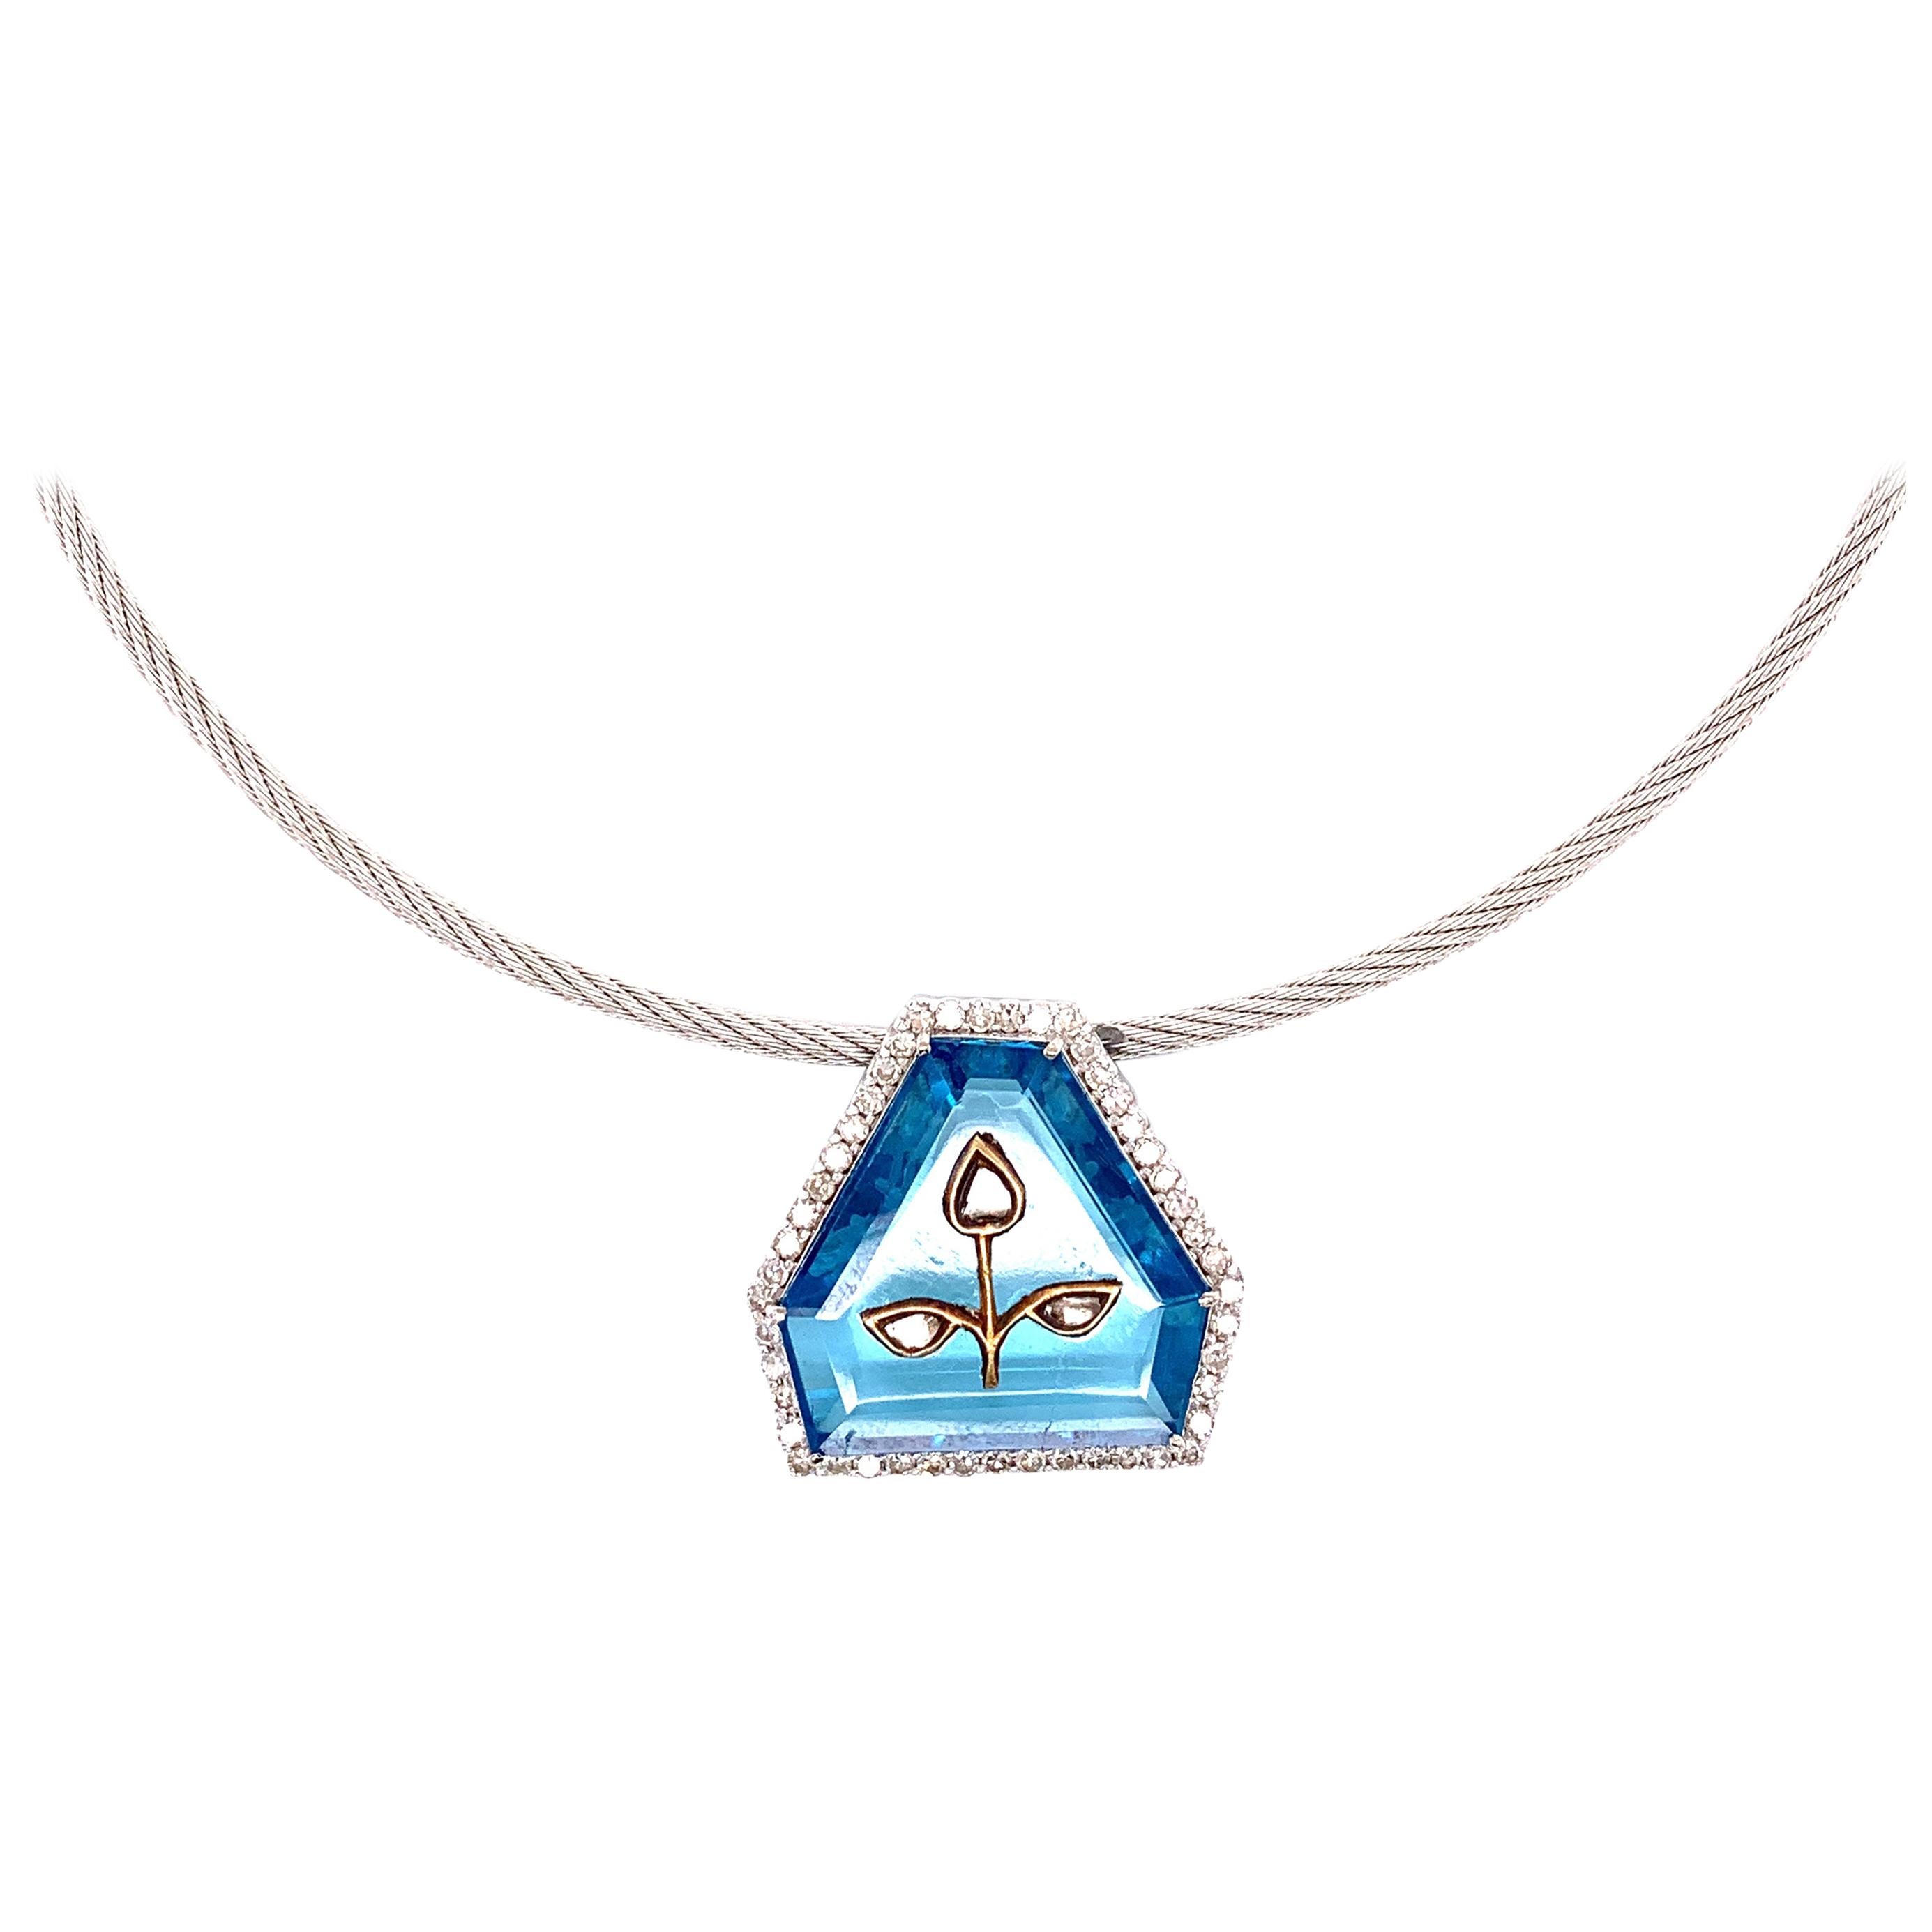 Diamond Inlayed Zircon and White Diamond 18K Gold Pendant with Chain:

A very unique pendant, it features a beautiful shield-cut blue zircon with uncut diamonds inlayed onto the stone, surrounded by a halo of white round brilliant diamonds weighing